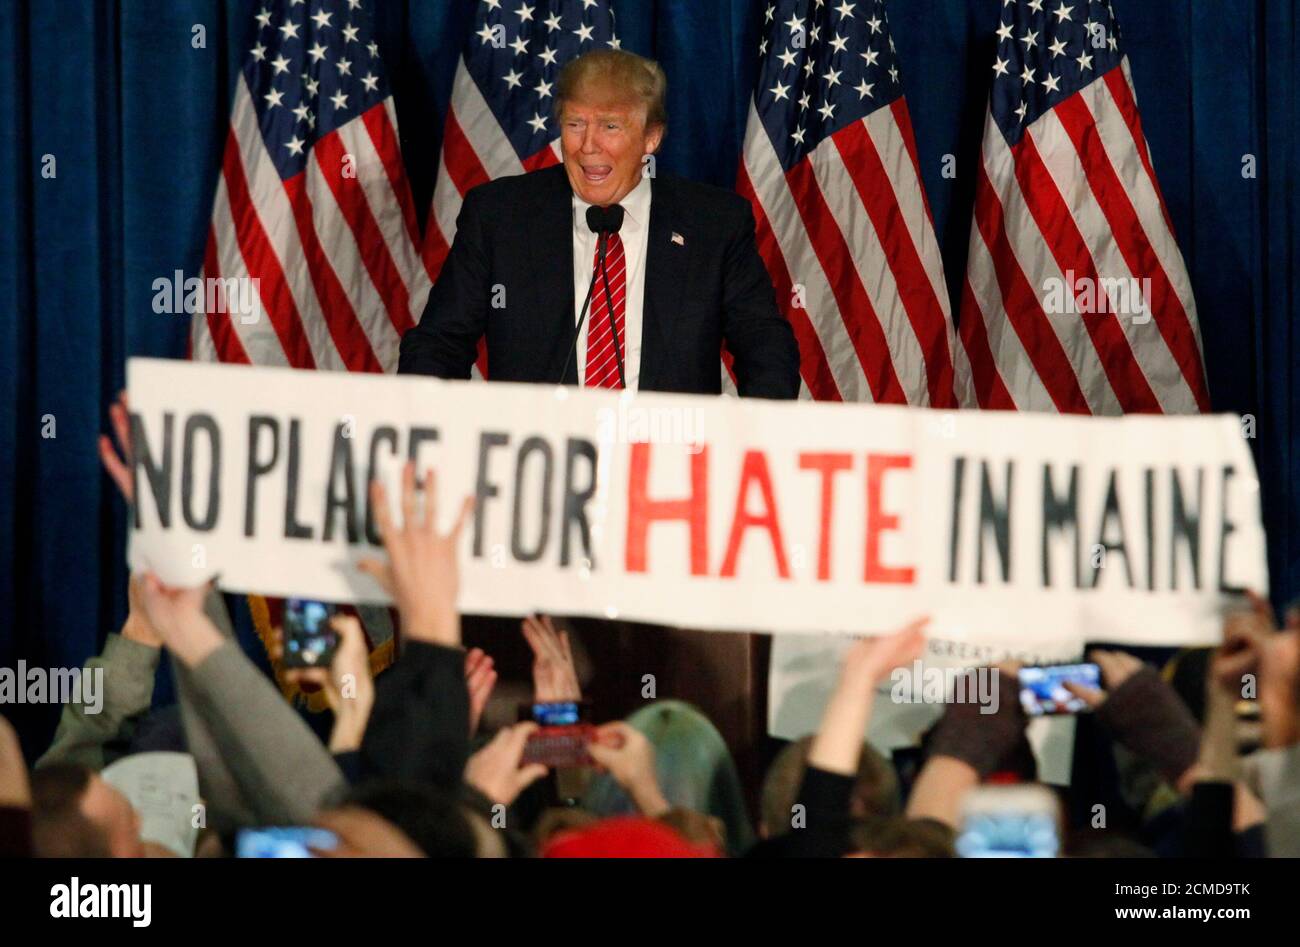 Republican U.S. presidential candidate Donald Trump smiles as protestors hold up a sign reading 'No Place for Hate in Maine' during a campaign rally in Portland, Maine March 3, 2016. REUTERS/Joel Page TPX IMAGES OF THE DAY Stock Photo